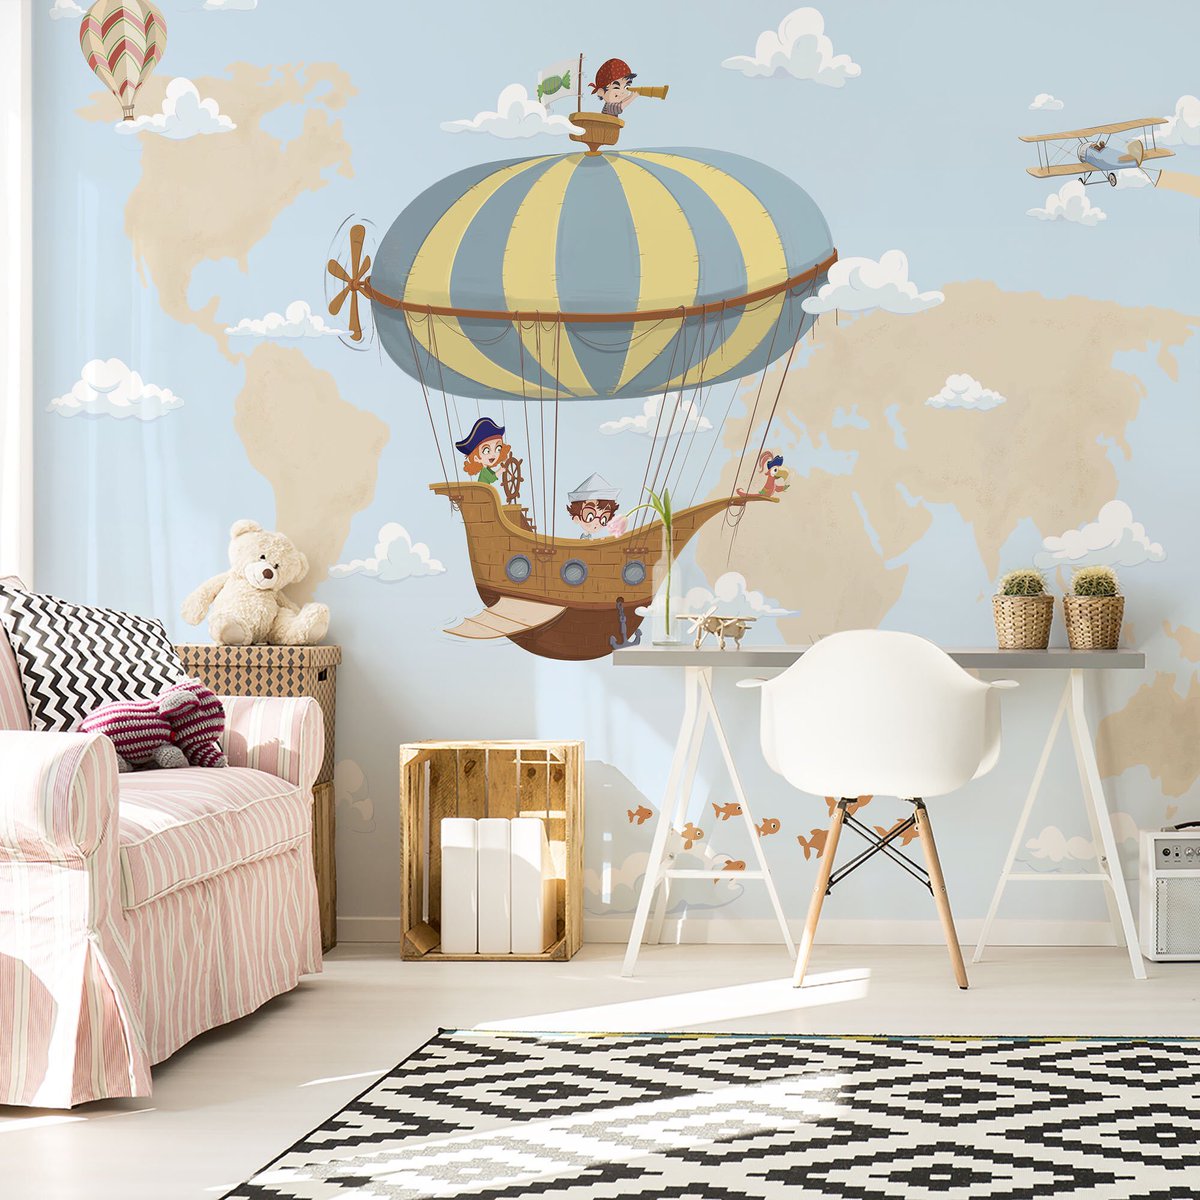 This is a new design for my shop #Etsy . Wallpaper mural of a world map and children's illustration of a pirate ship.  #nurseryroom #childwallpaper #wallart #wallpaperforkids #worldmap #childrensmural #nurserywallpaper #kidsroom etsy.me/2pqI4Wc